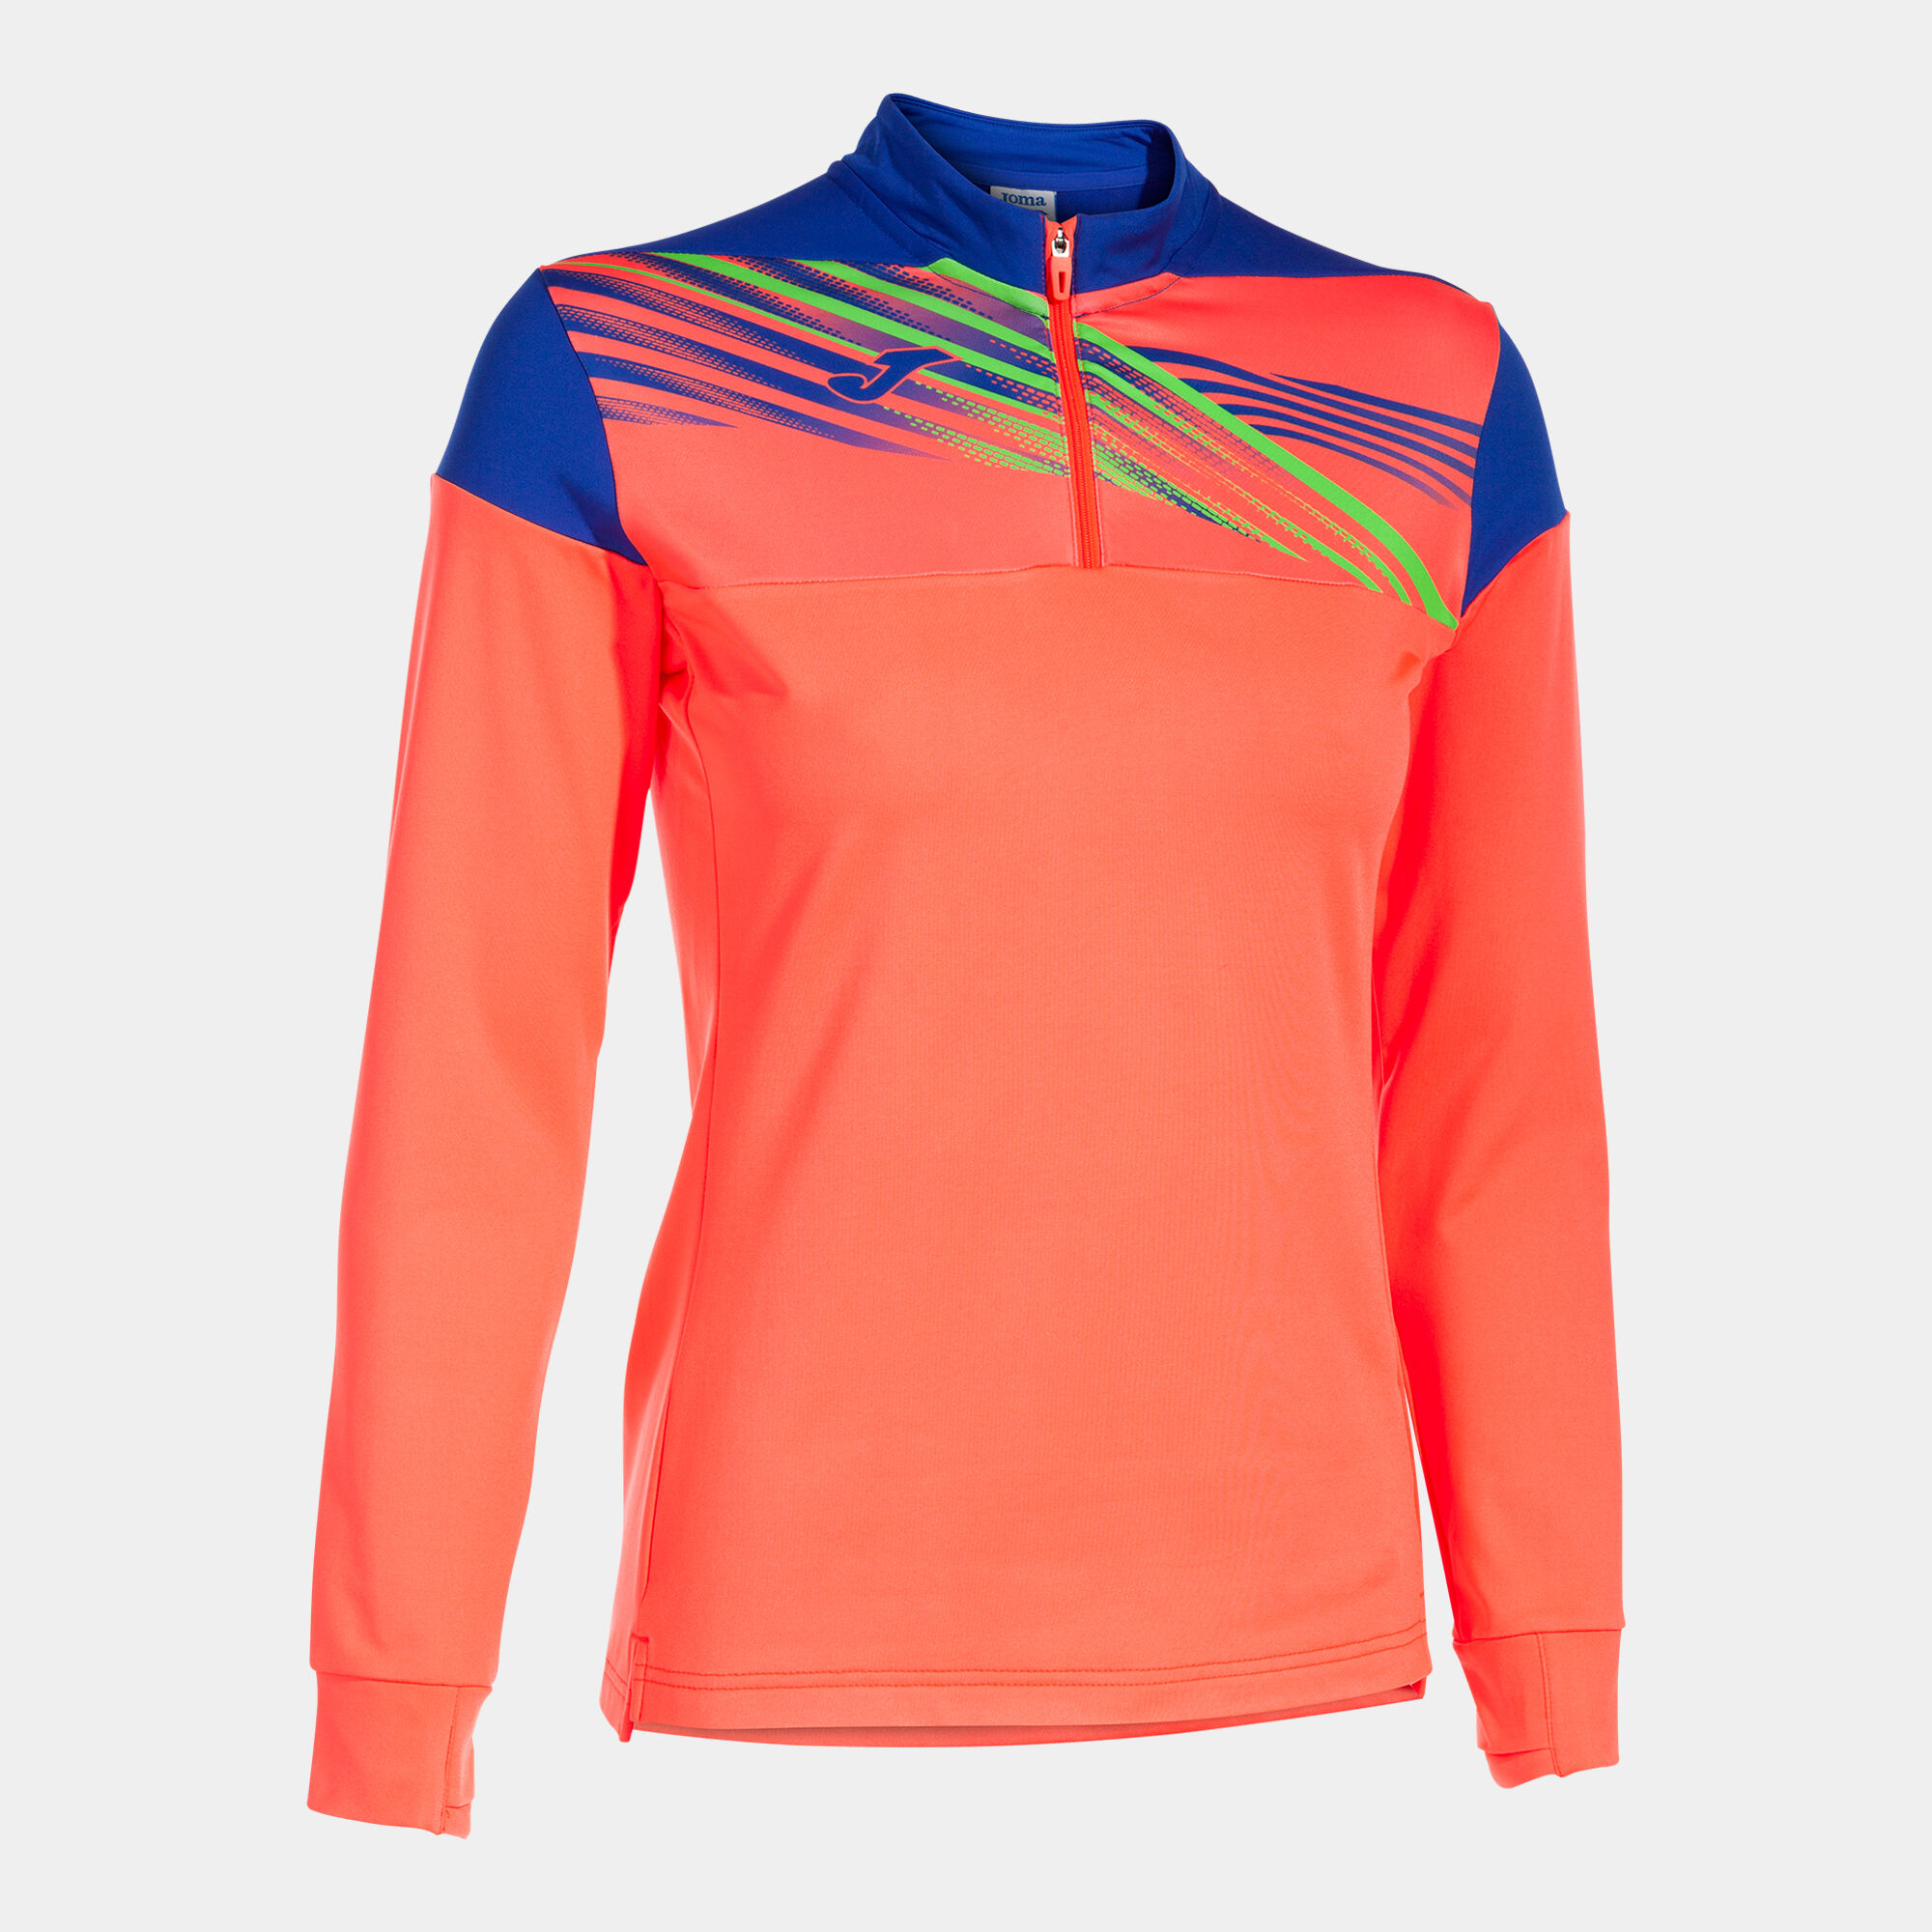 Sweet mulher Elite X coral fluorescente azul royal